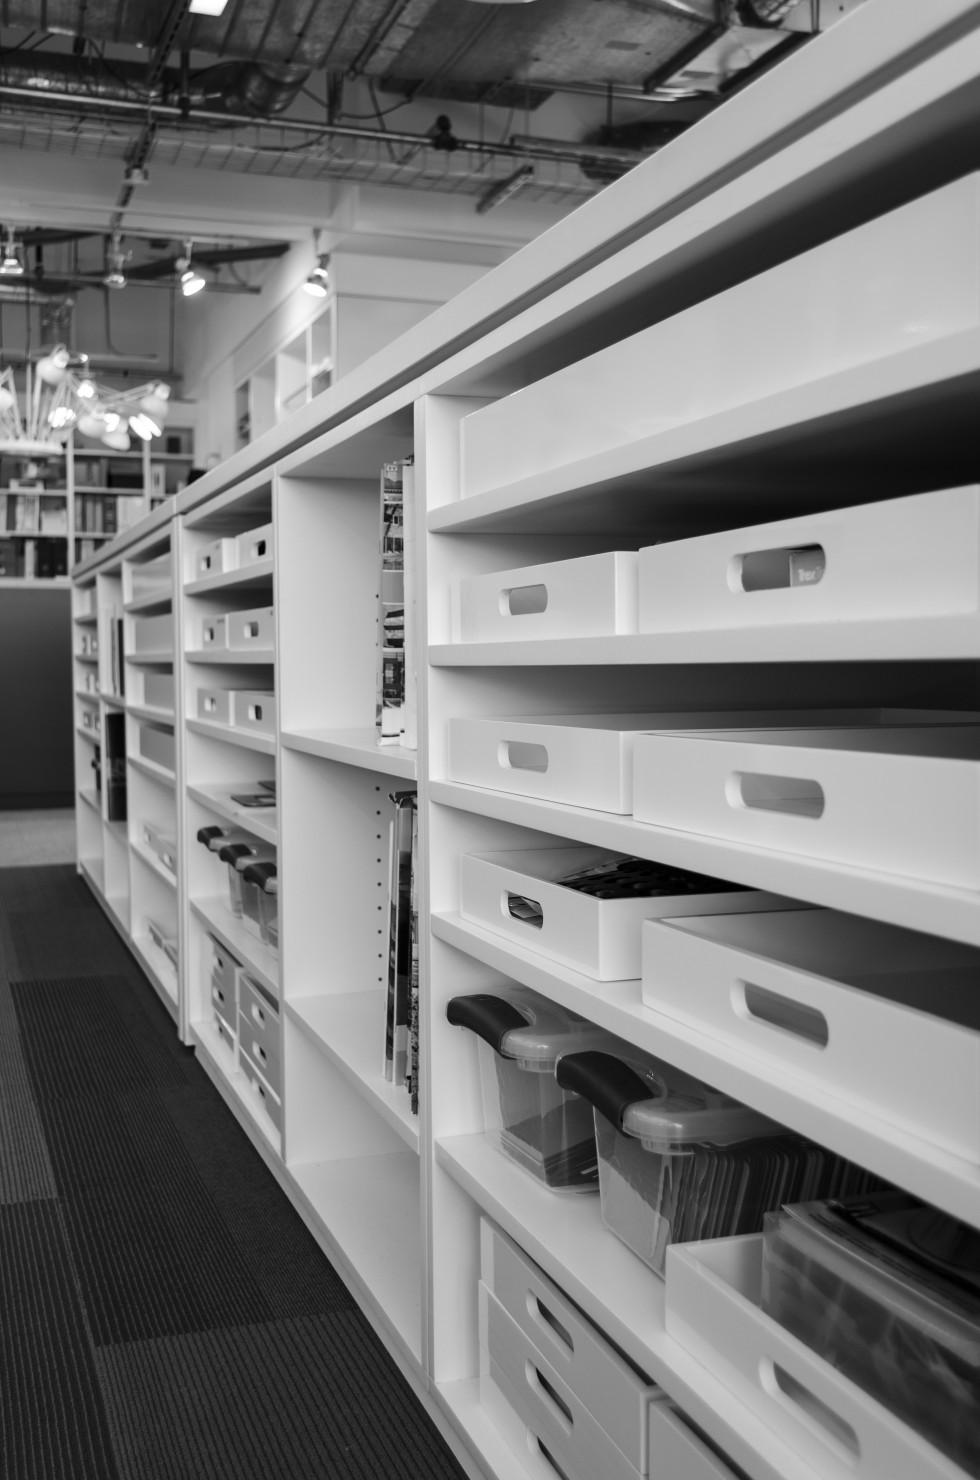 Architectural library shelves and material 